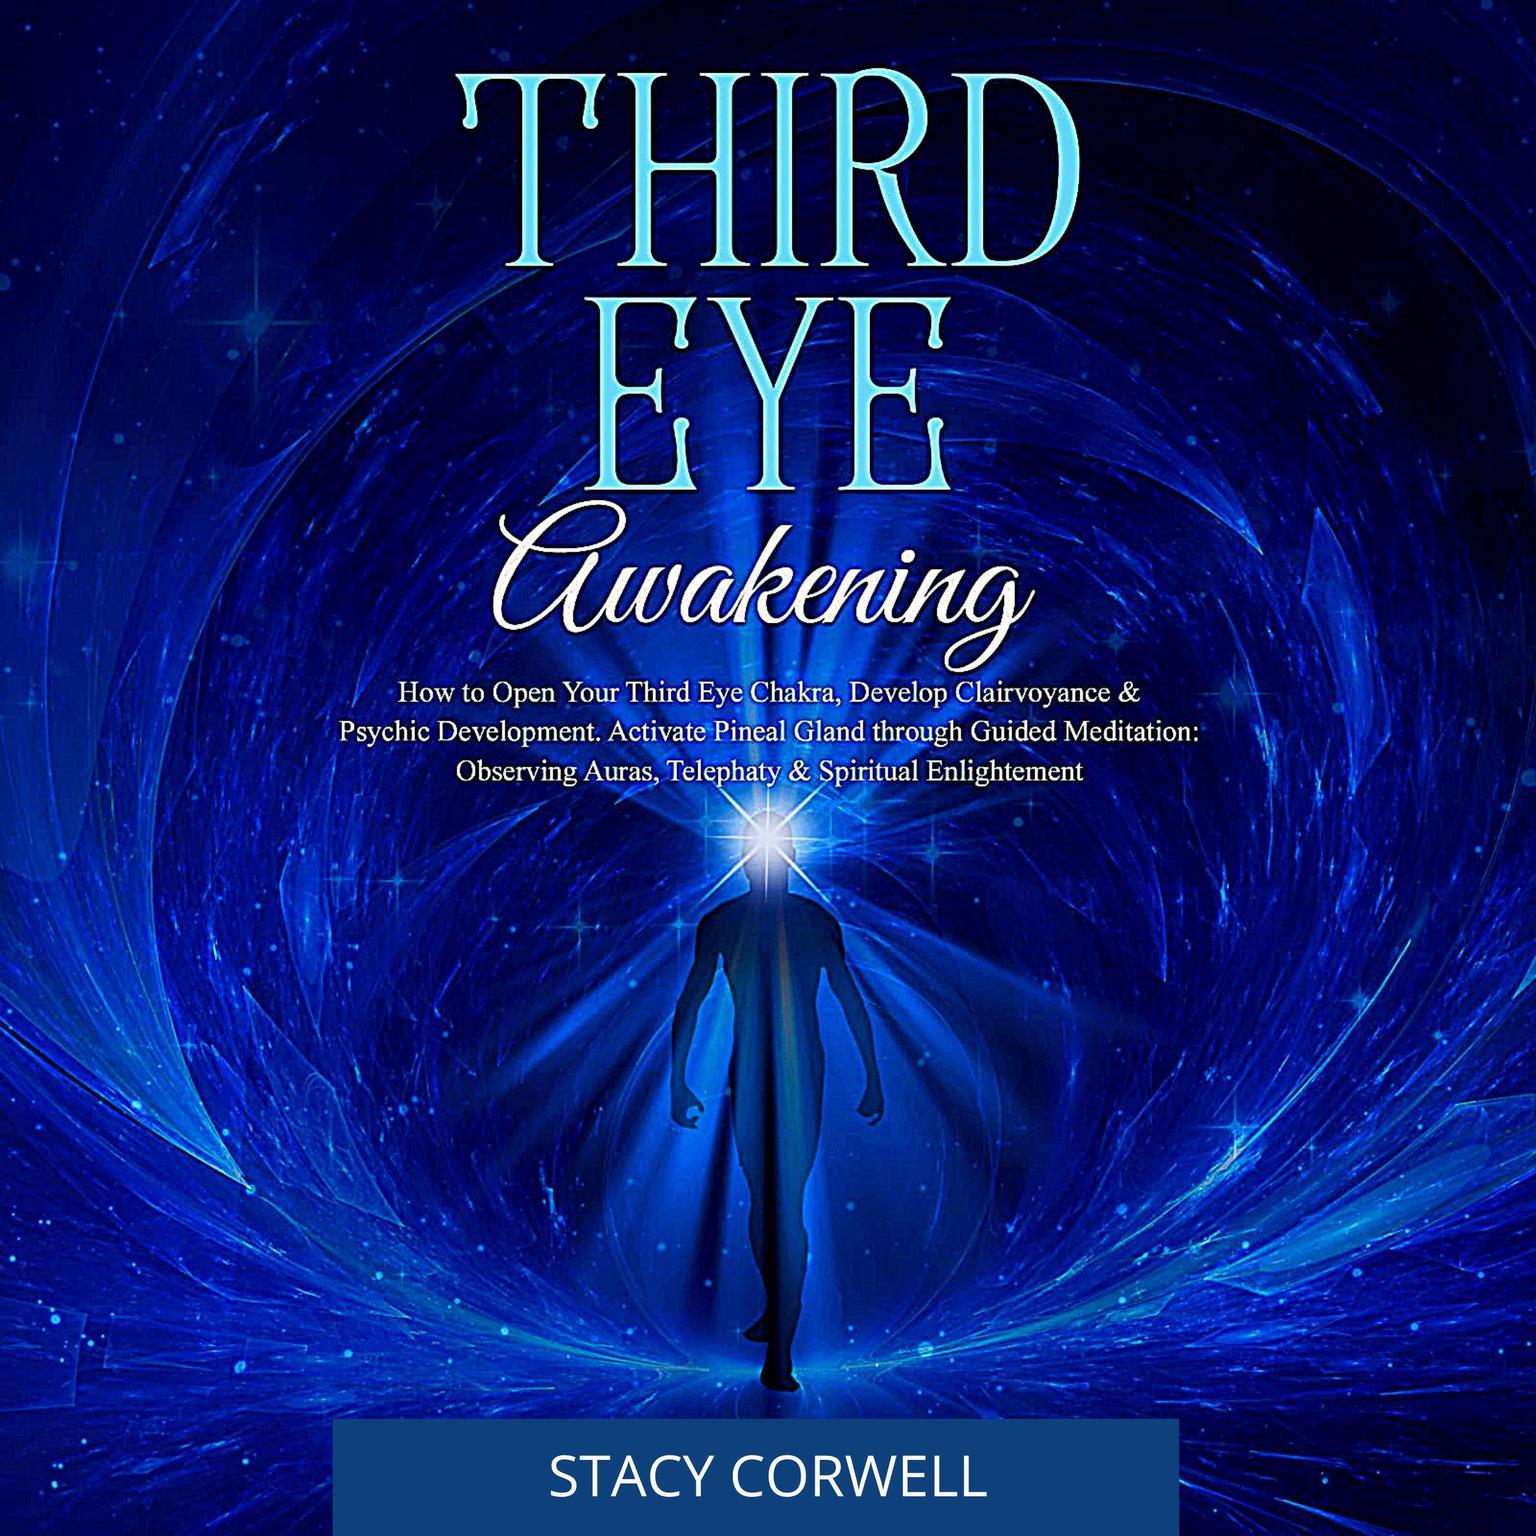 Third Eye Awakening: How to Open Your Third Eye Chakra, Develop Clairvoyance & Psychic Development. Activate Pineal Gland with Guided Meditation: ... Telephaty & Spiritual Enlightement Audiobook, by Stacy Corwell